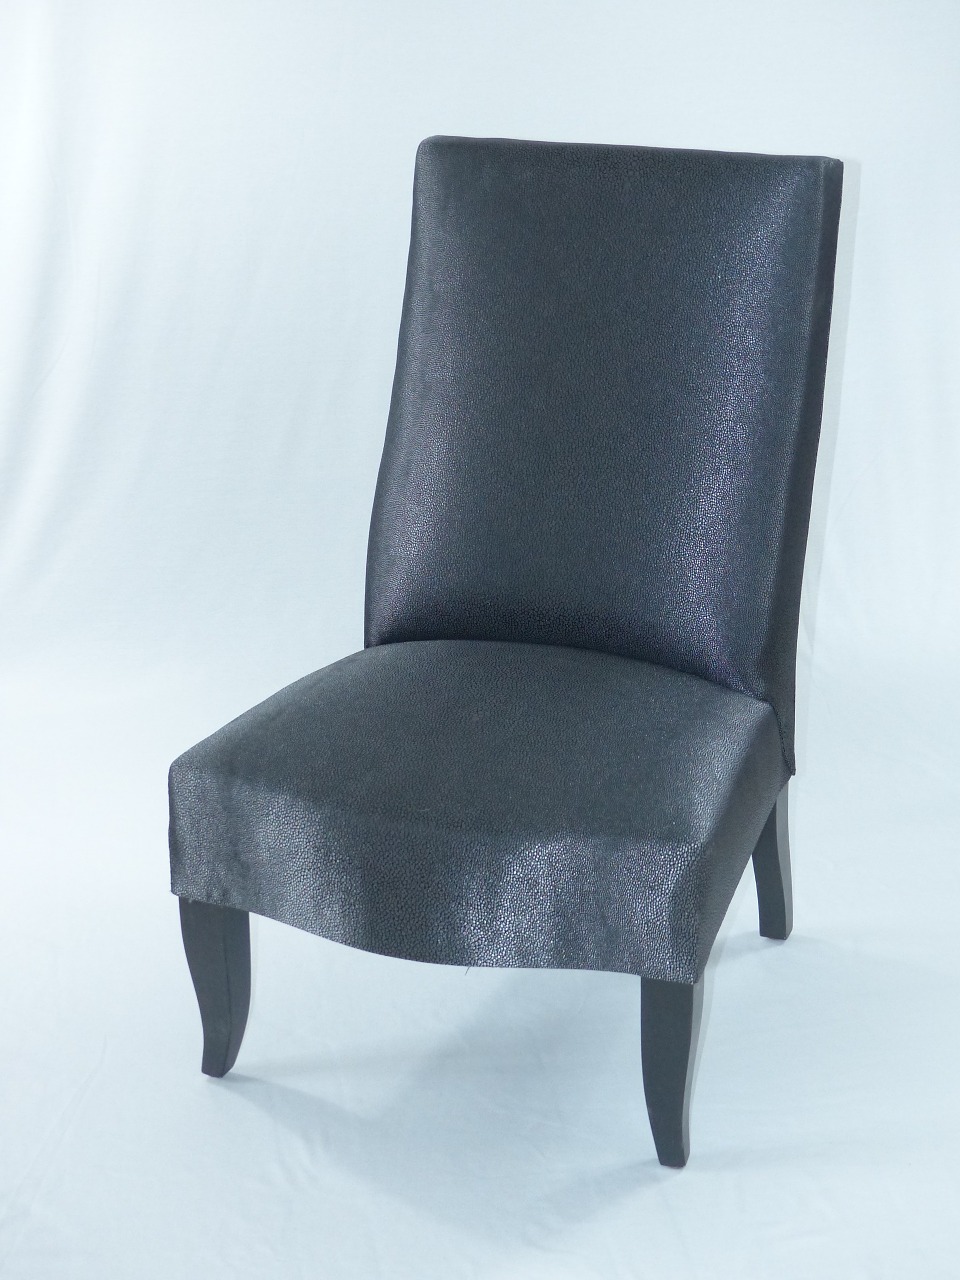 lounge chair upholsterer fabric free photo